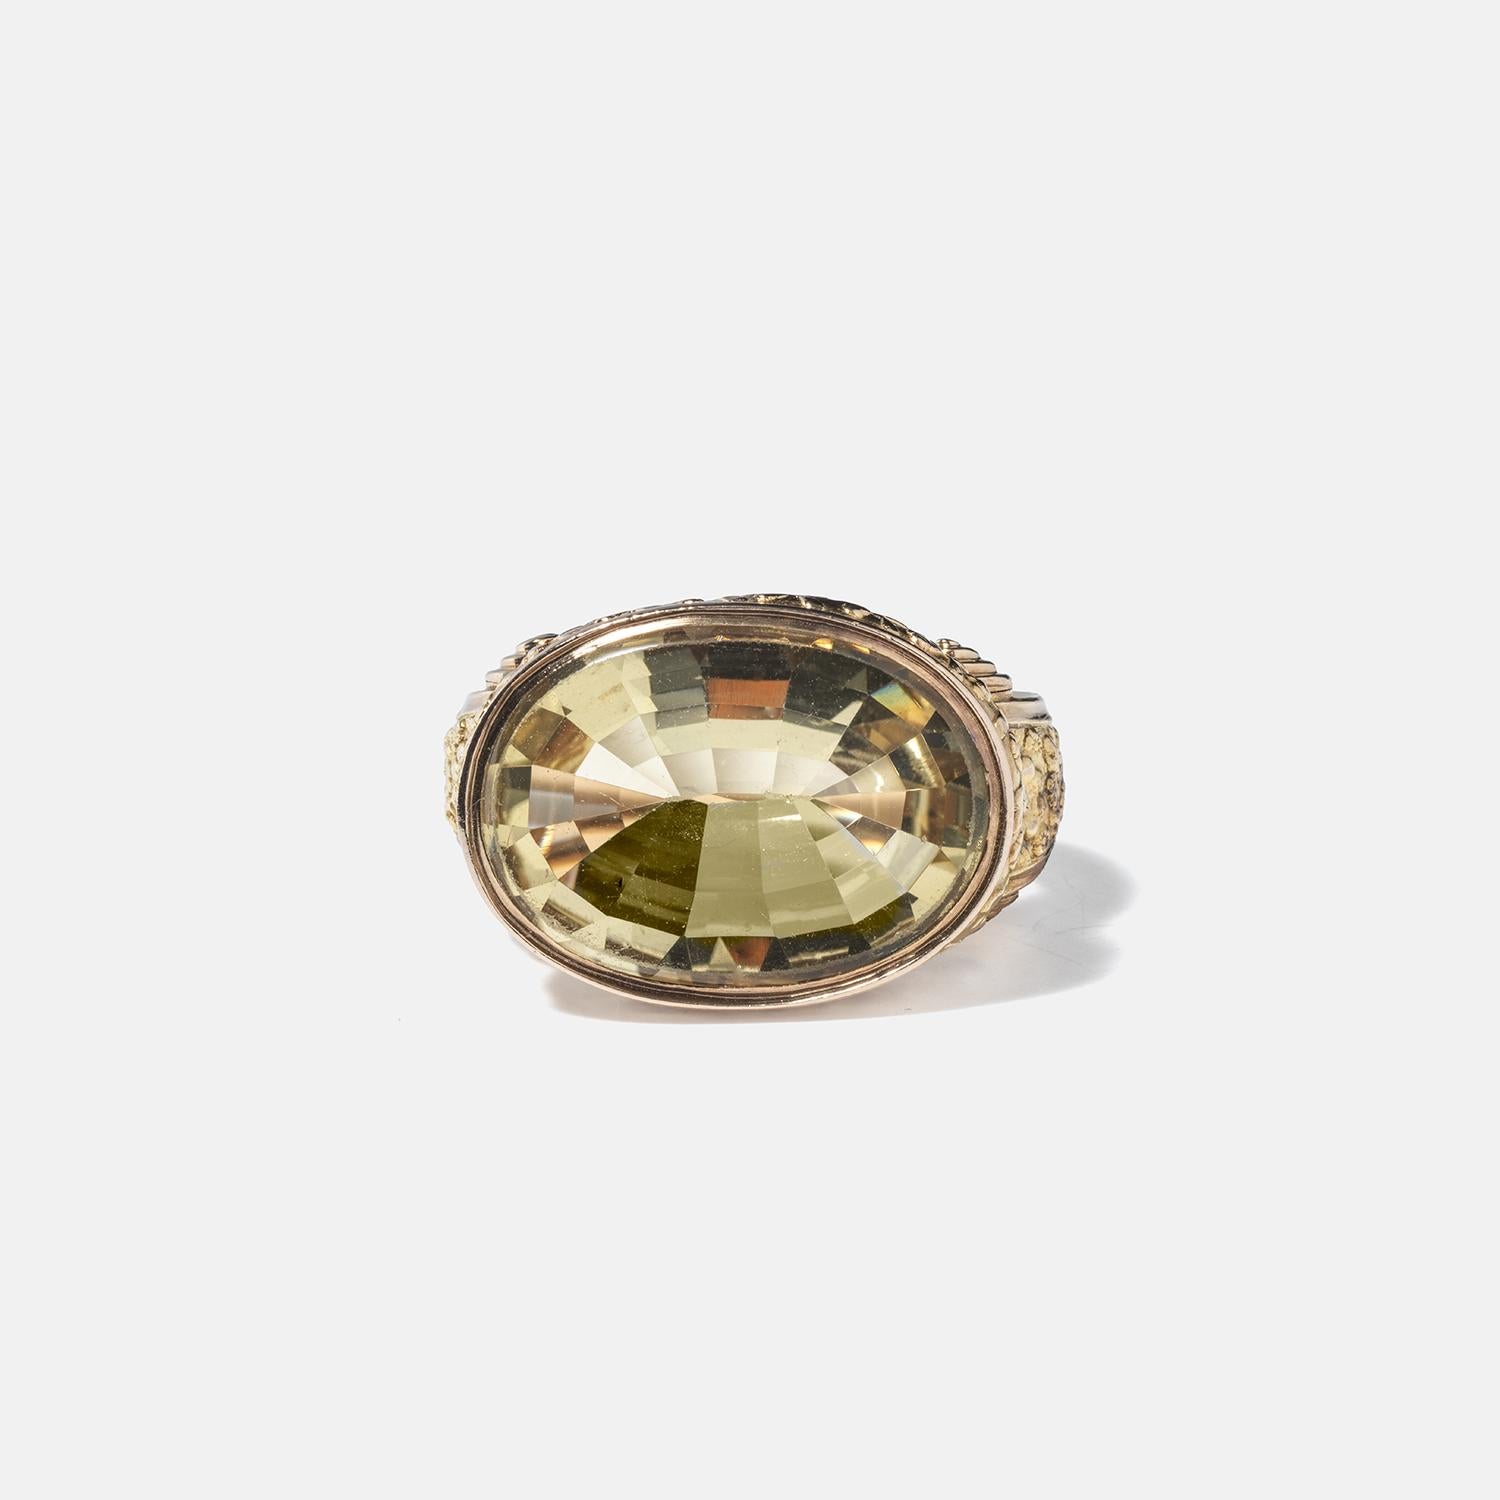 Very Large Antique 18k Gold and Citrine Ring Made Year 1833 For Sale 4